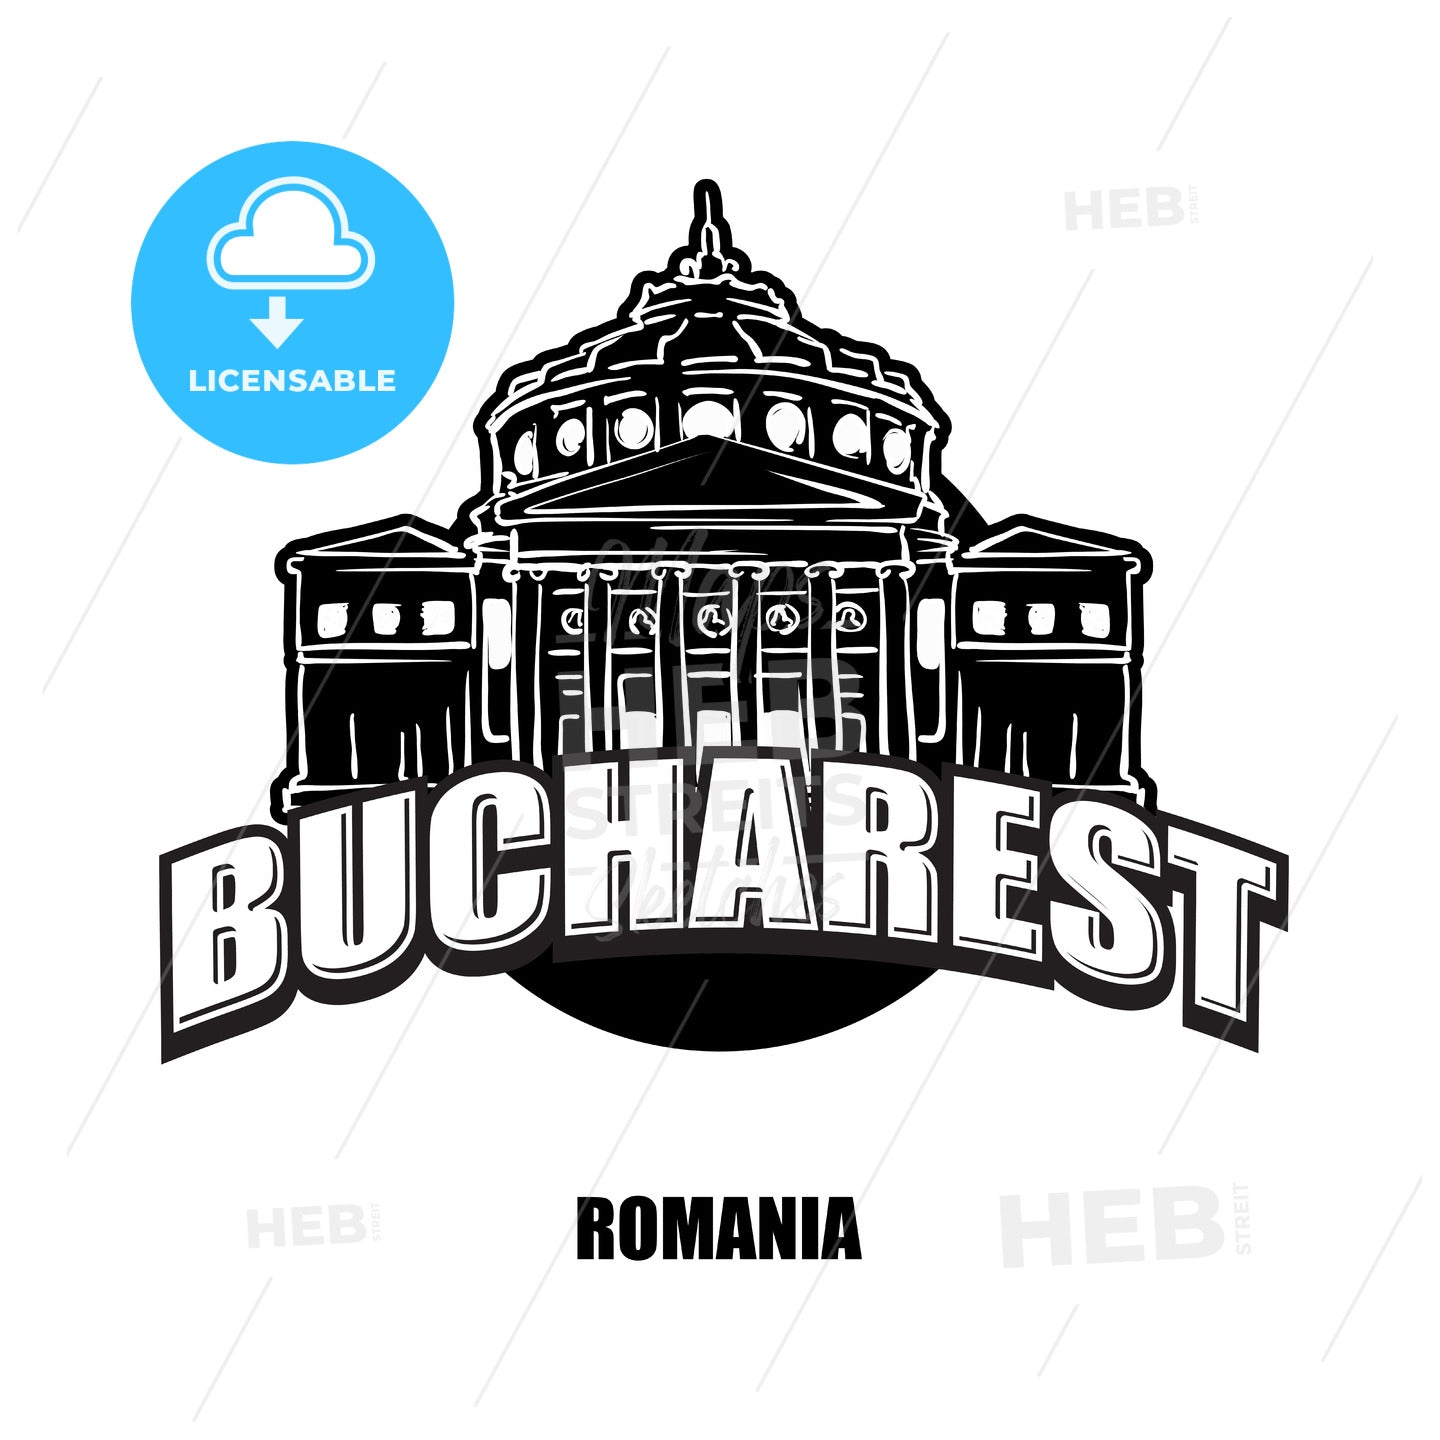 Bucharest, Romania, black and white logo – instant download